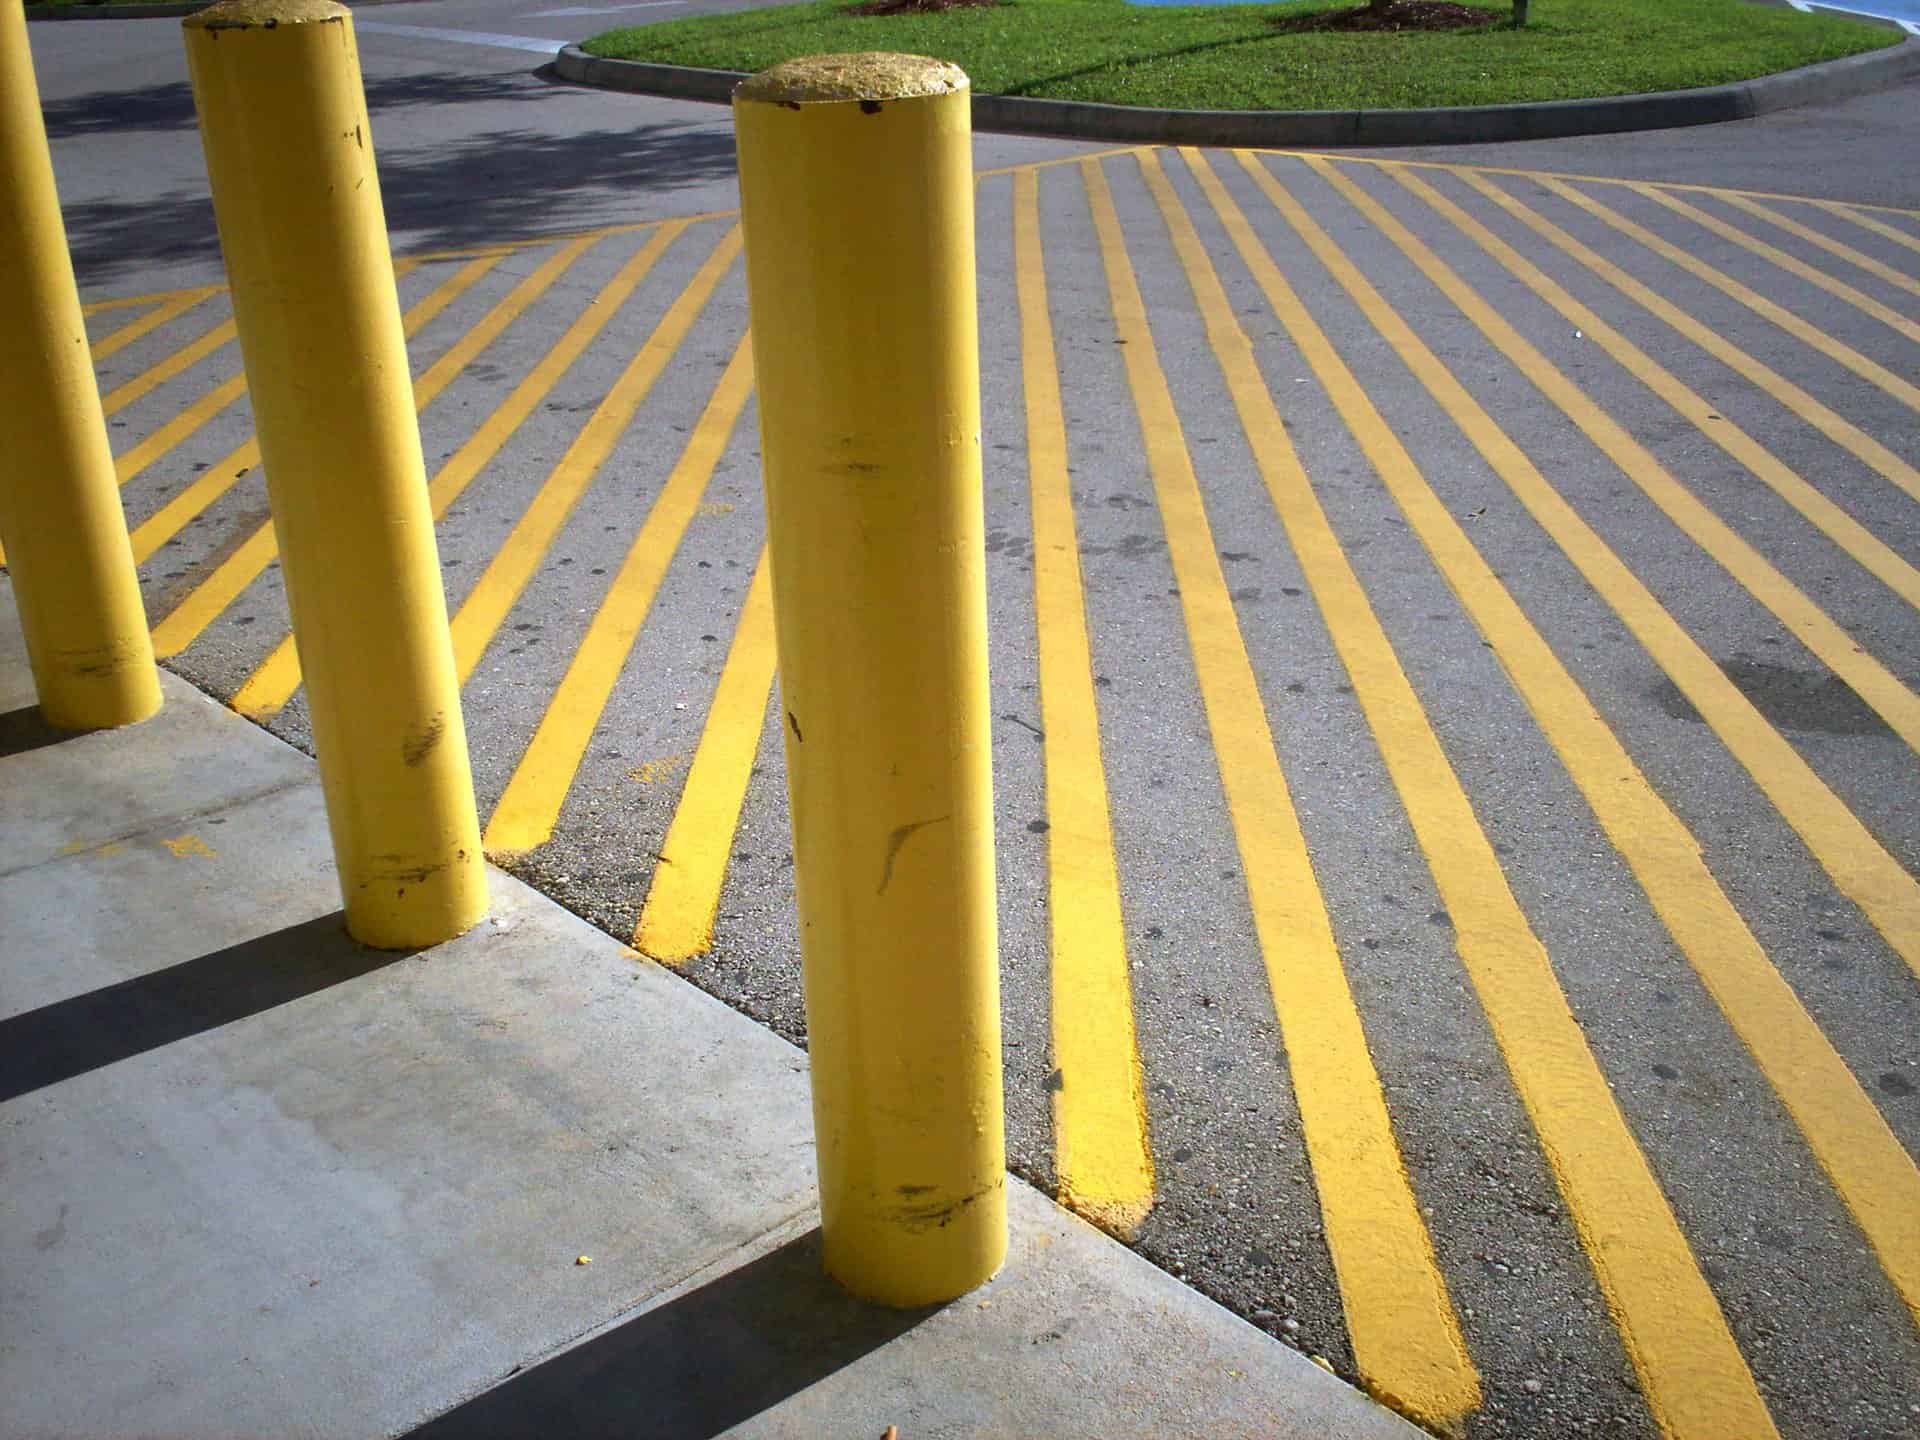 yellow painted lines on concrete in a parking lot with a sidewalk with yellow painted cement posts